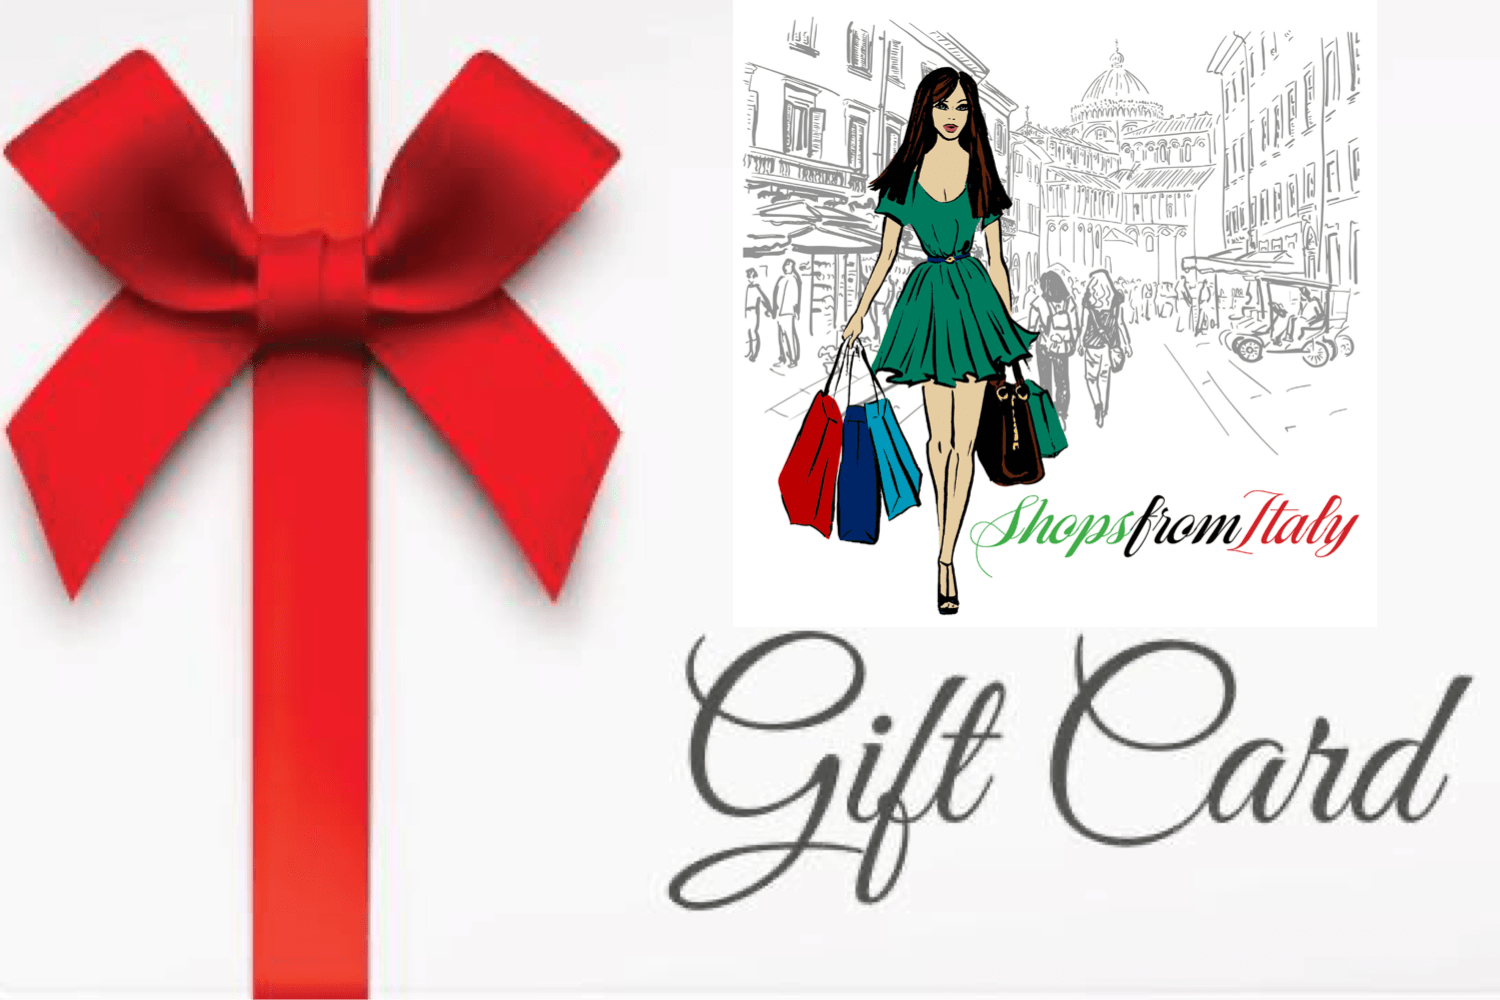 ShopsfromItaly Gift Card $50.00 USD ShopsfromItaly Gift Cards